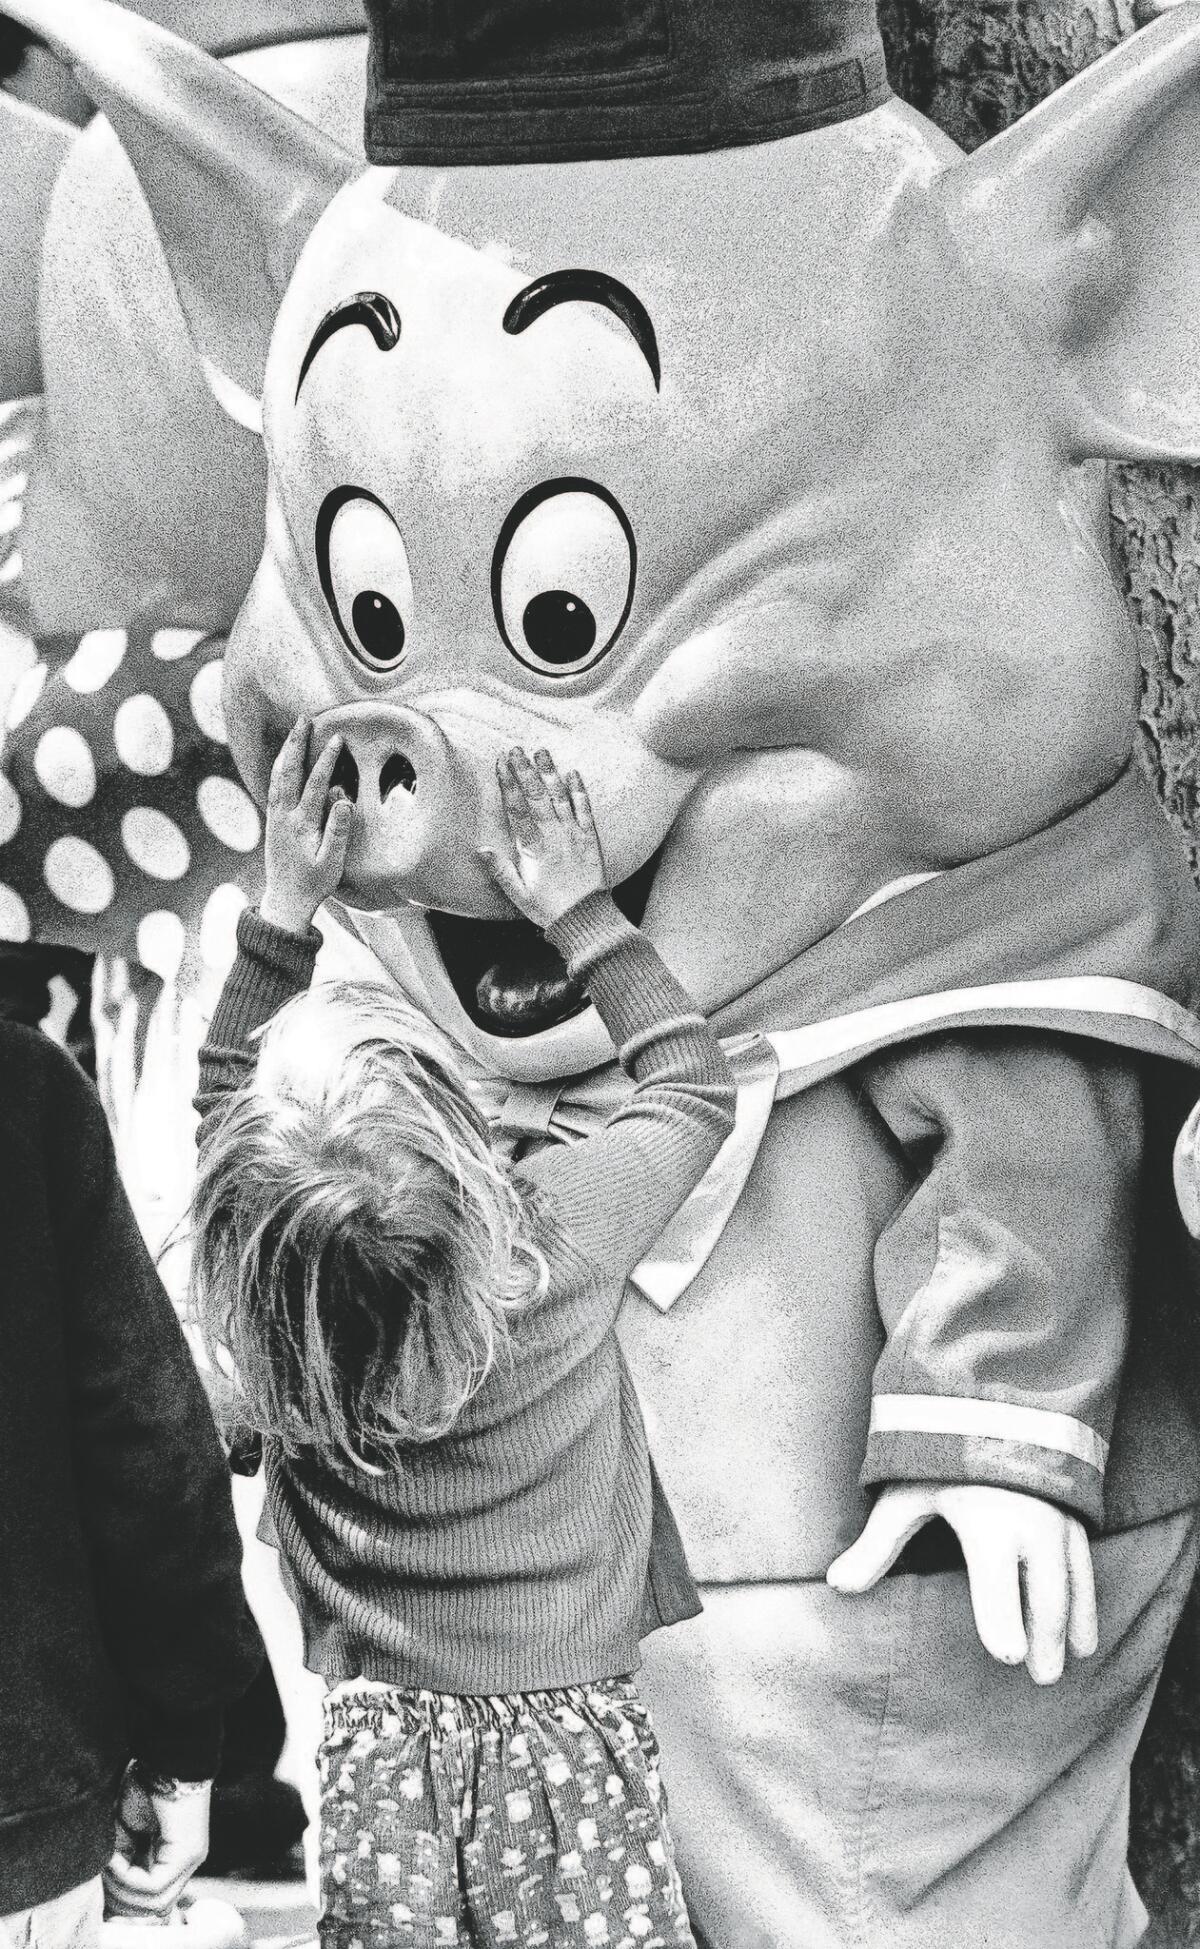 A child visiting Disneyland lovingly touches one of the "Three Little Pigs" costumed characters, a popular attraction at Disneyland, in 1977.